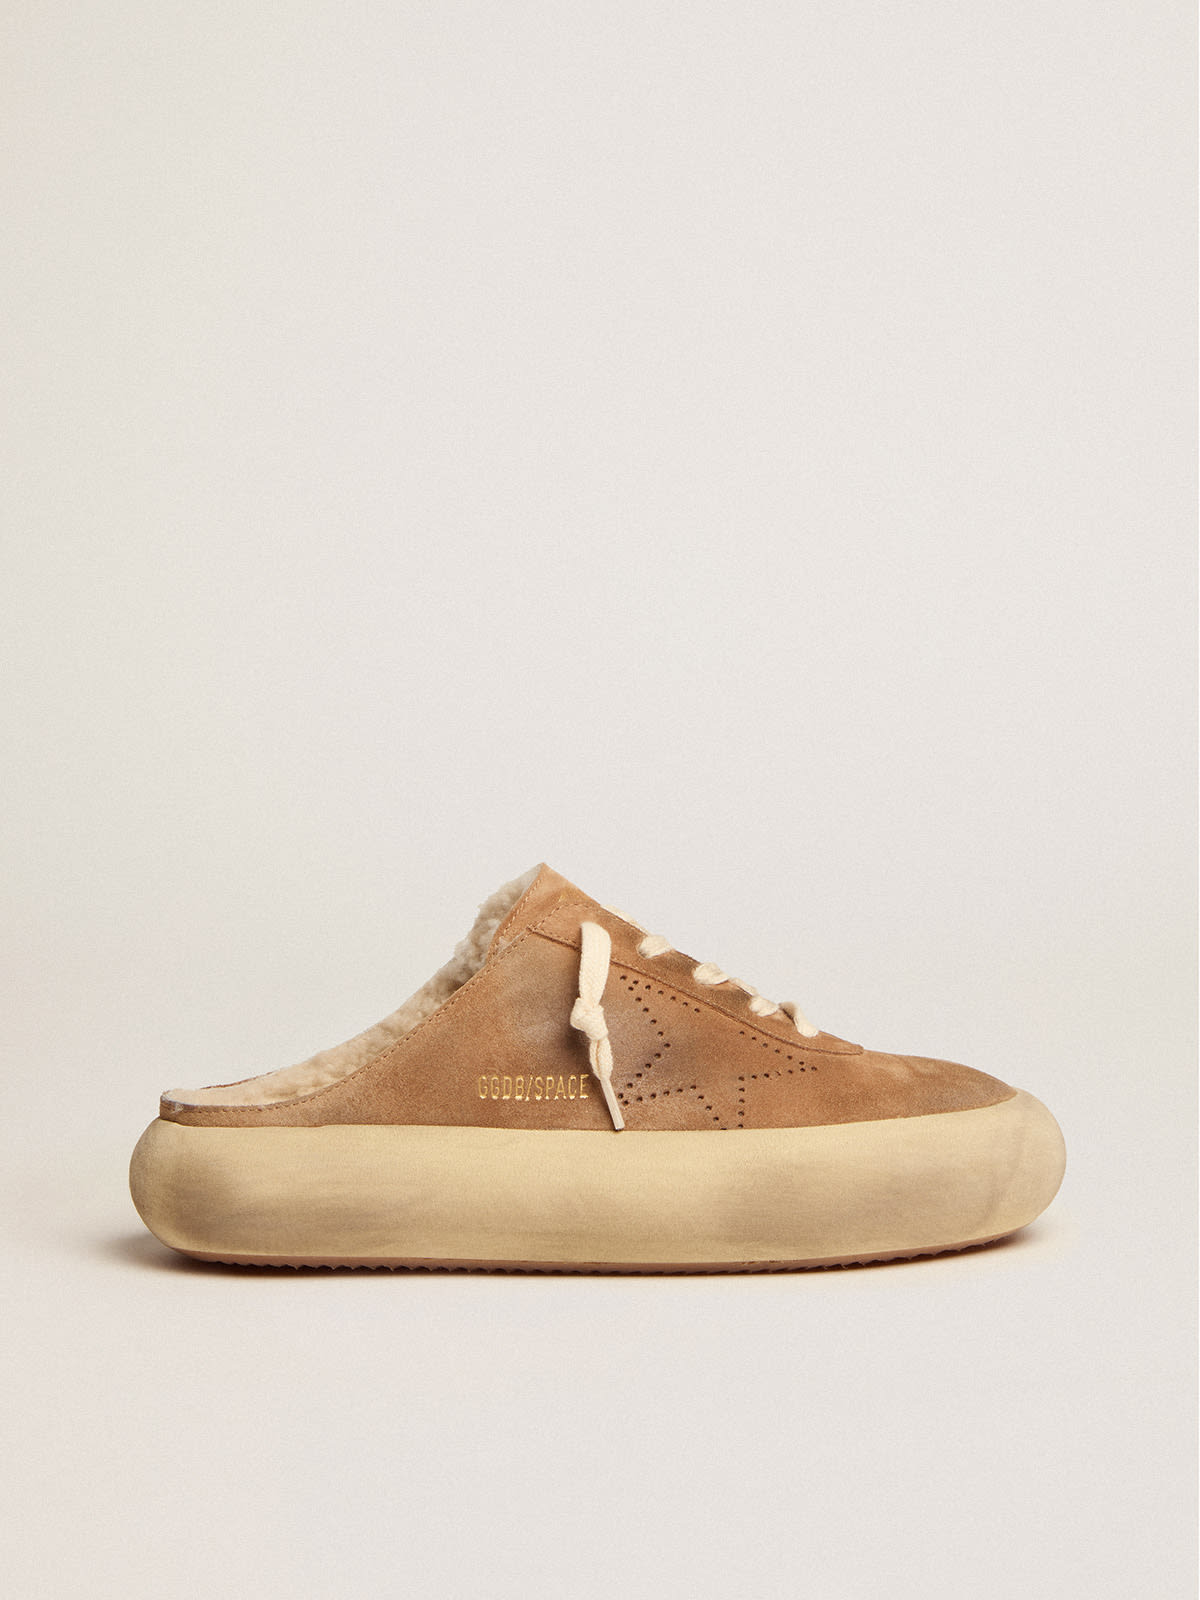 Golden Goose - Scarpe Space-Star Sabot Donna in suede color tabacco e fodera in shearling in 